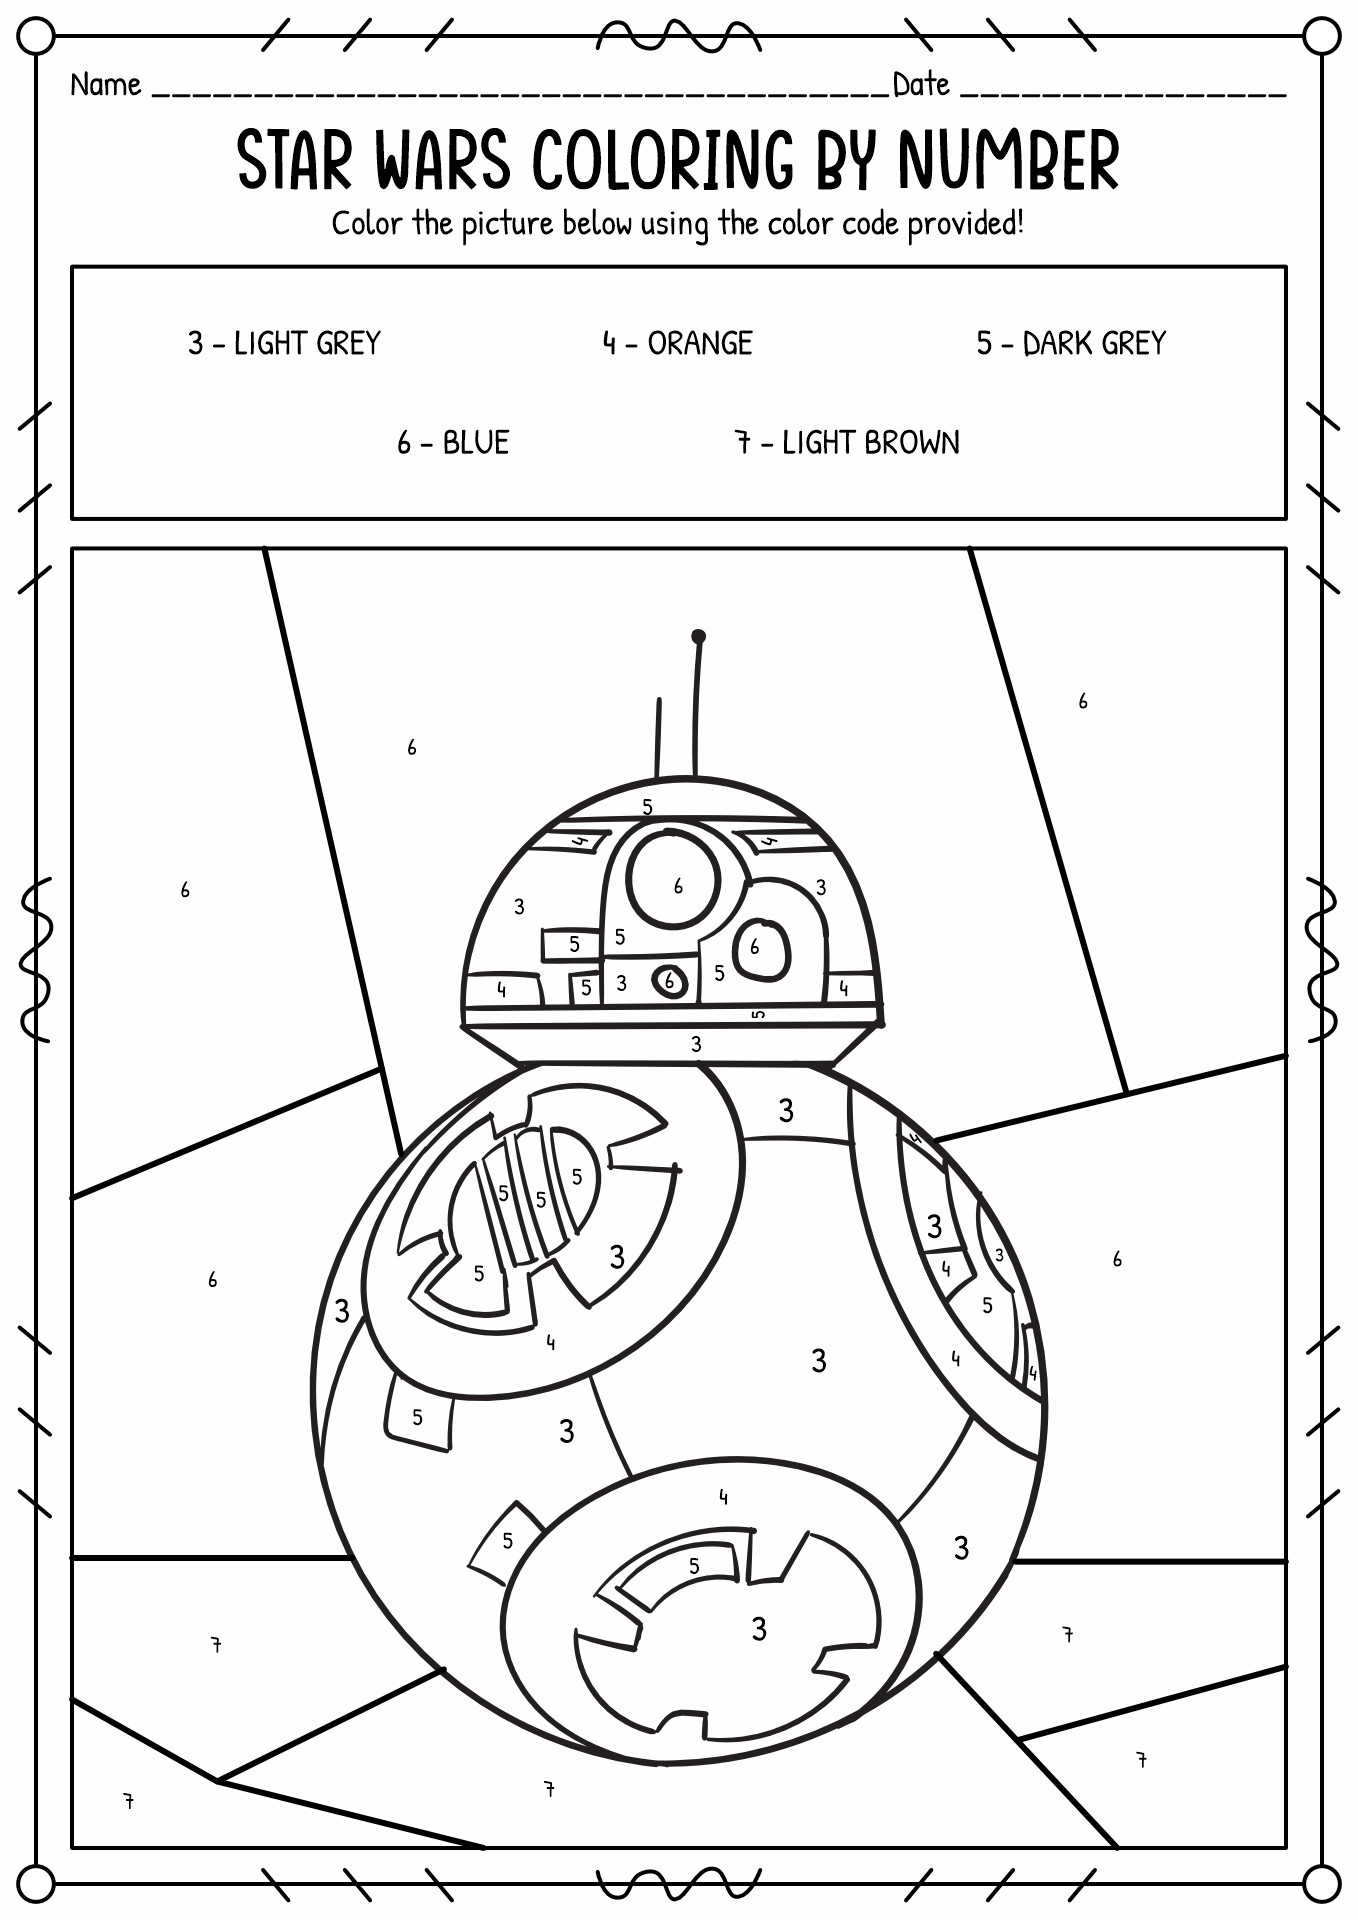 Star Wars Color by Number Coloring Pages